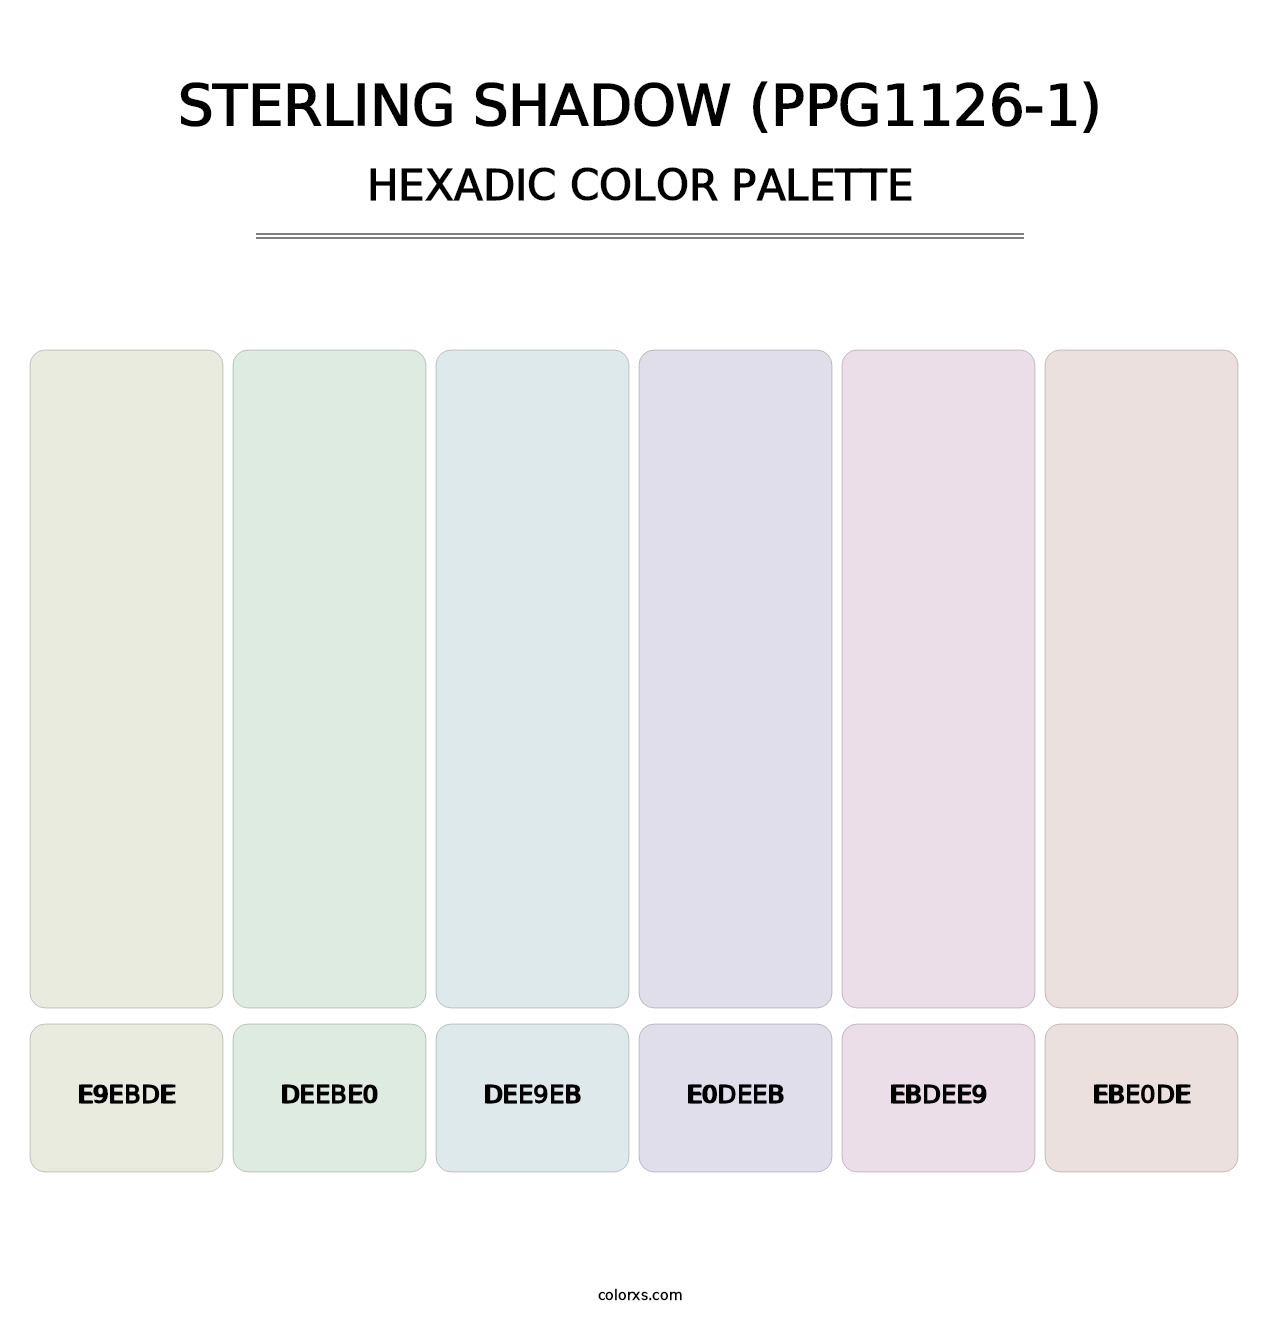 Sterling Shadow (PPG1126-1) - Hexadic Color Palette